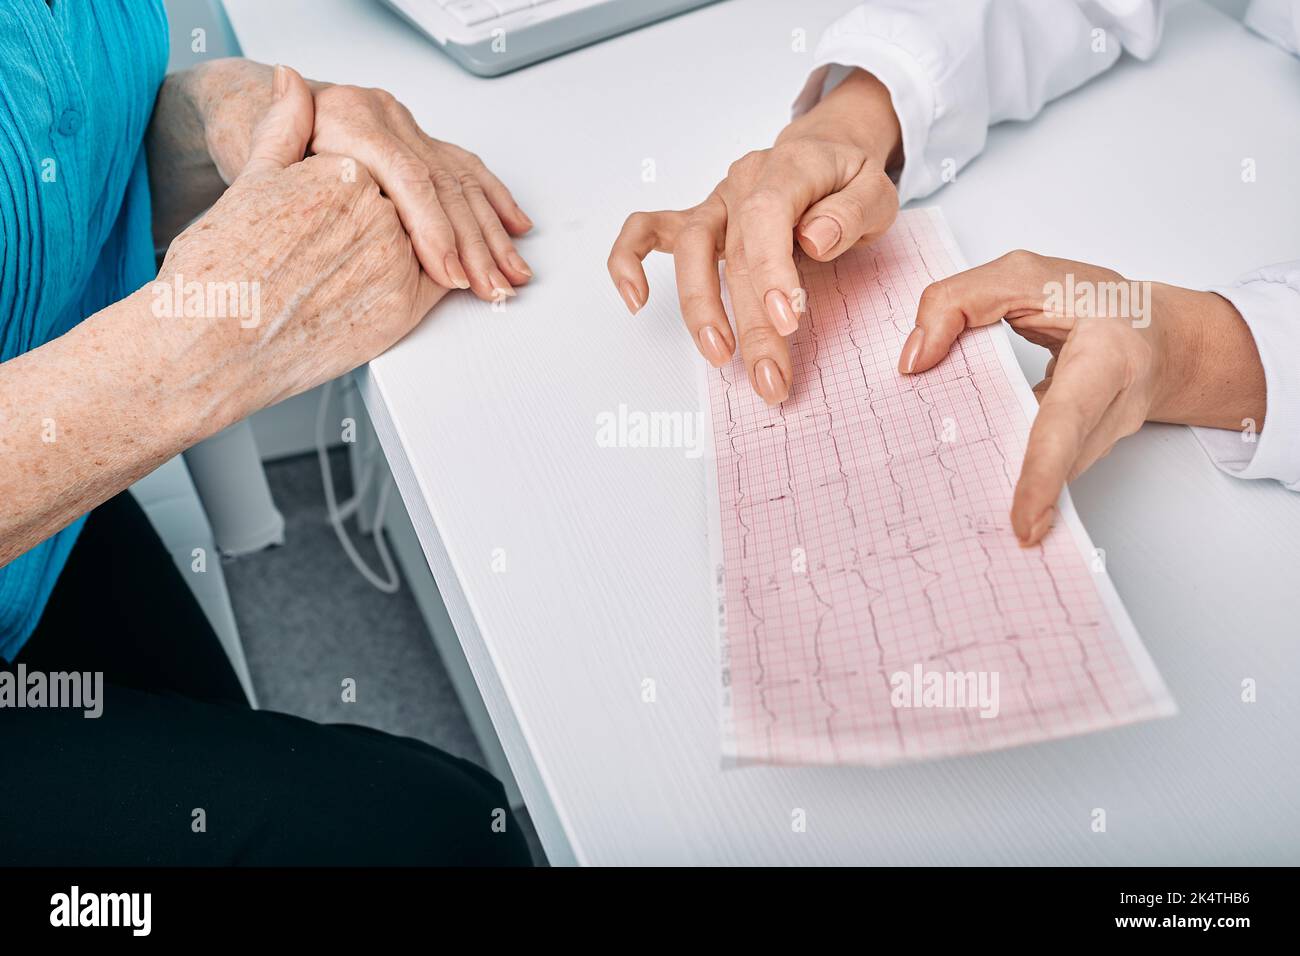 doctor cardiologist consulting woman patient on results of her cardiogram and heart test. Diagnostic heart diseases, cardiology Stock Photo